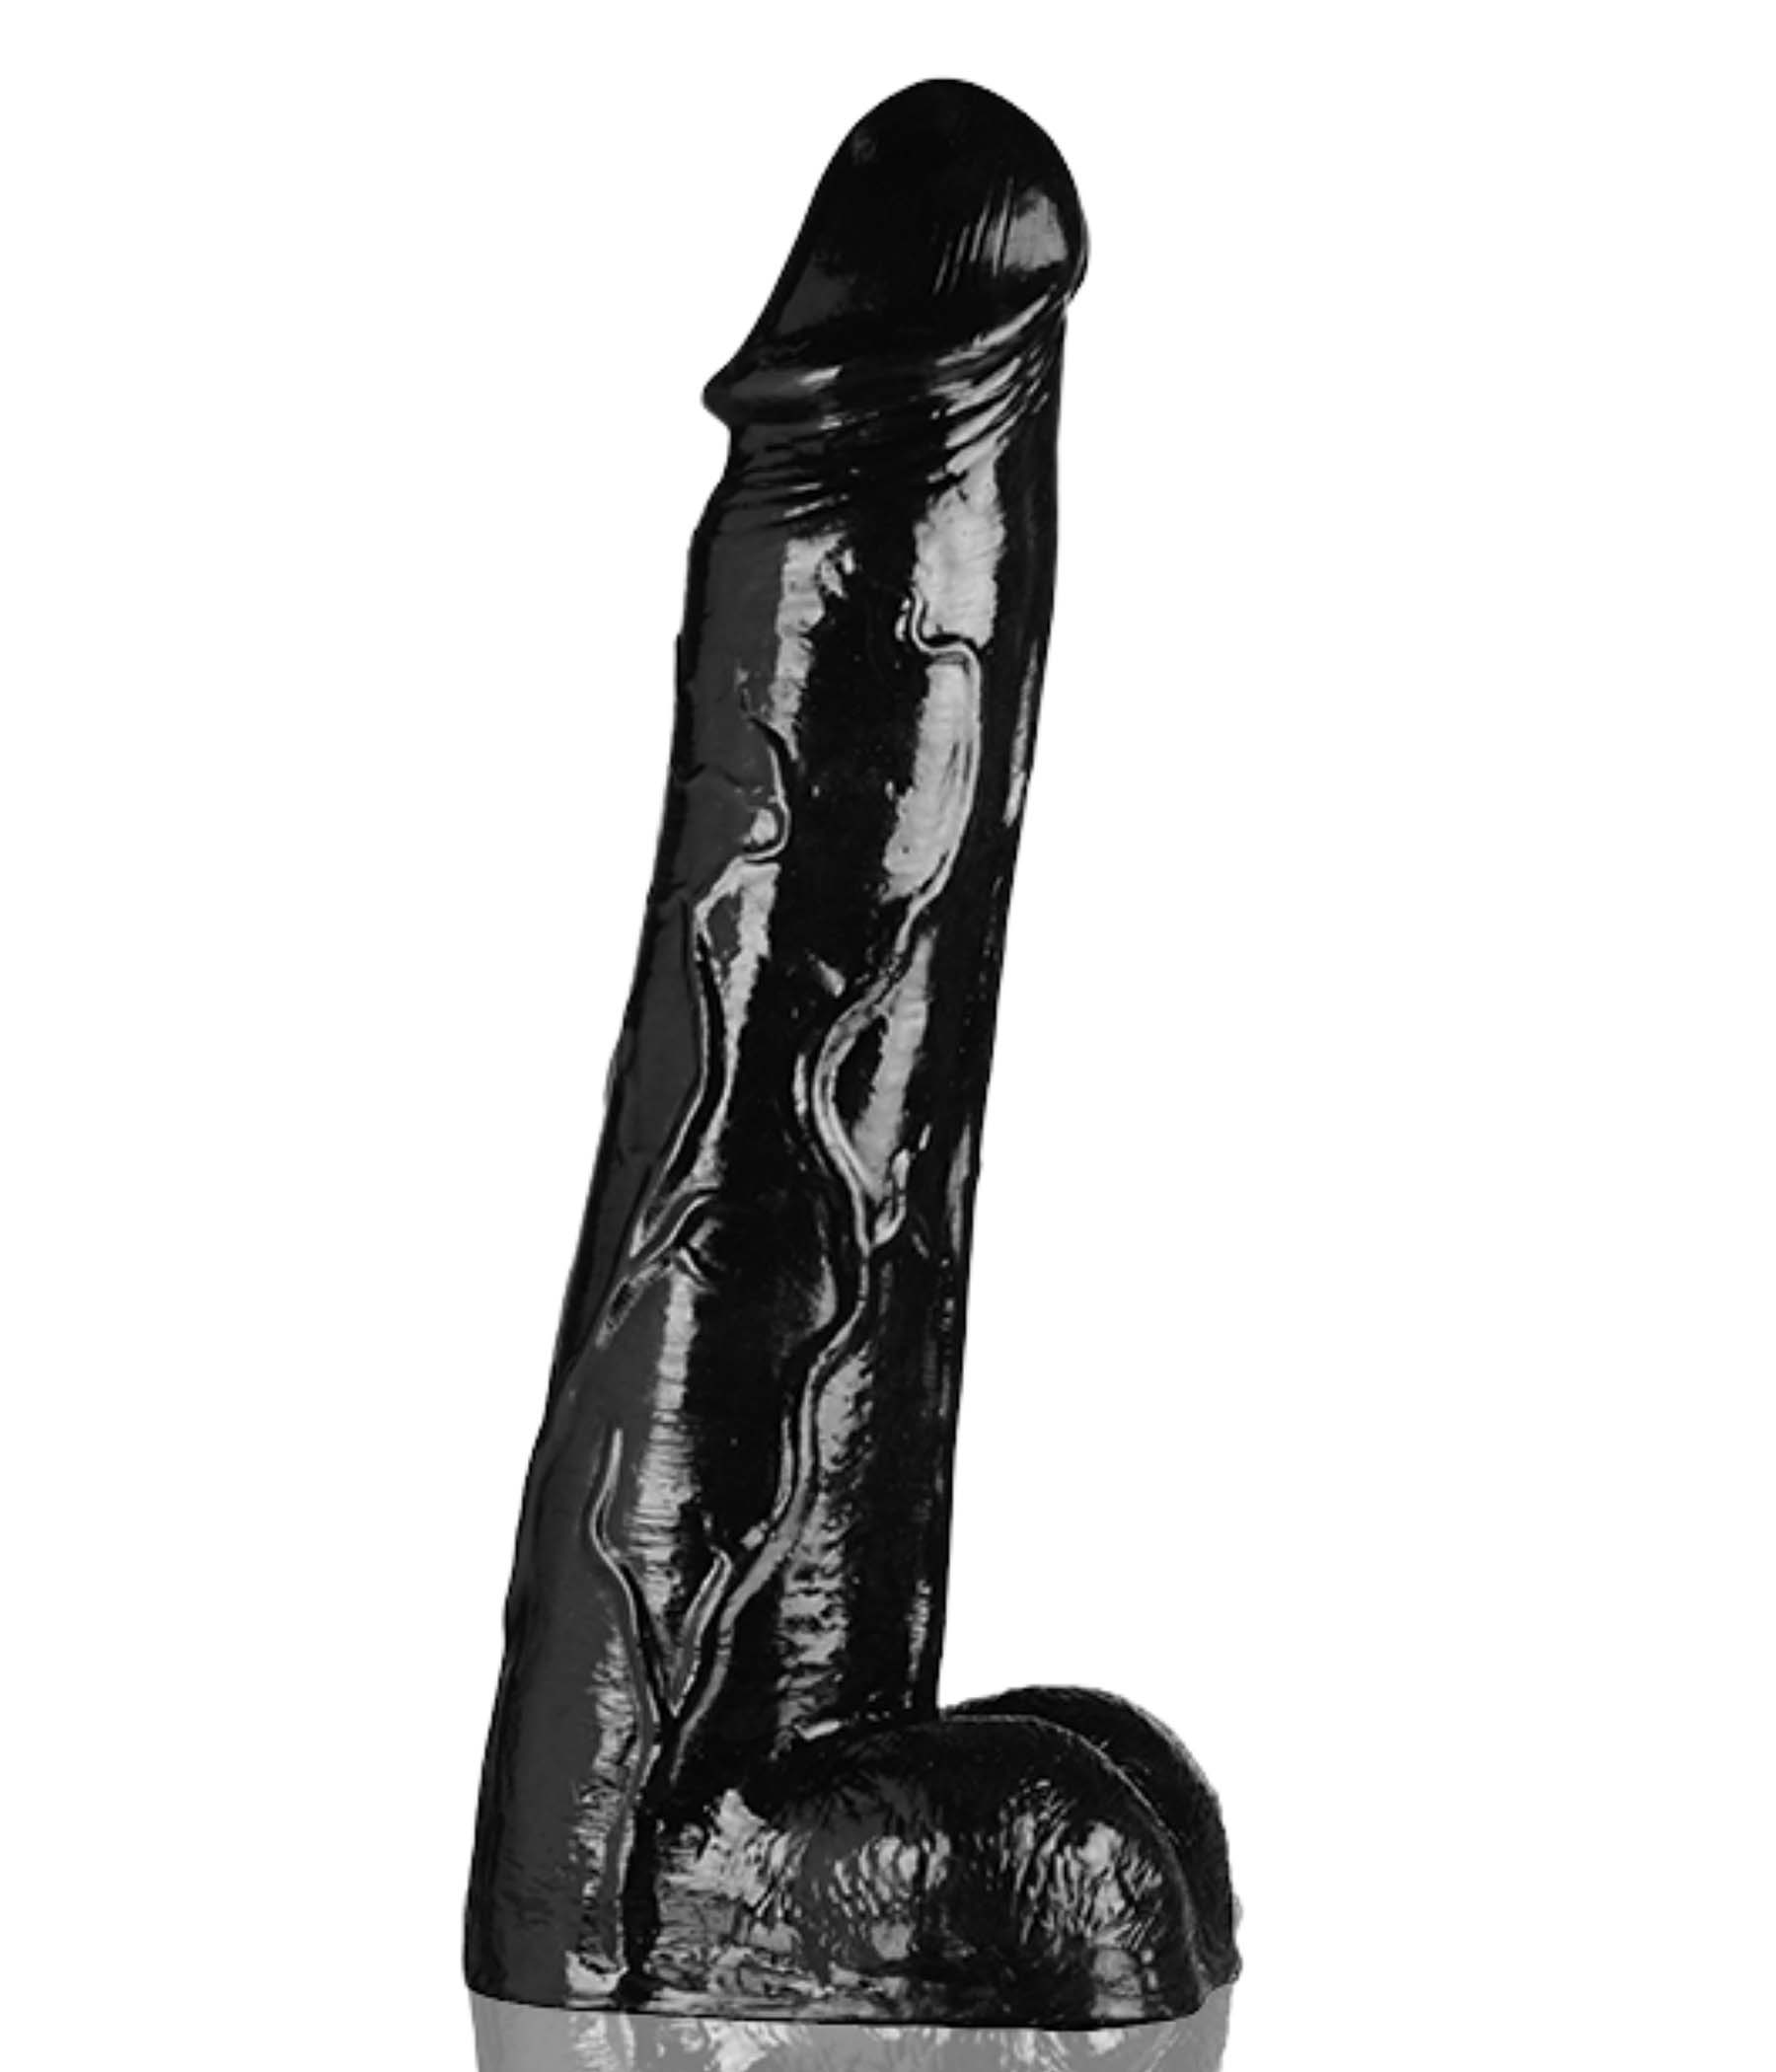 Inflatable Dildo Ebony - Moby Huge 3 Foot Tall Super Dildo - Black: Sex Toy Distributing